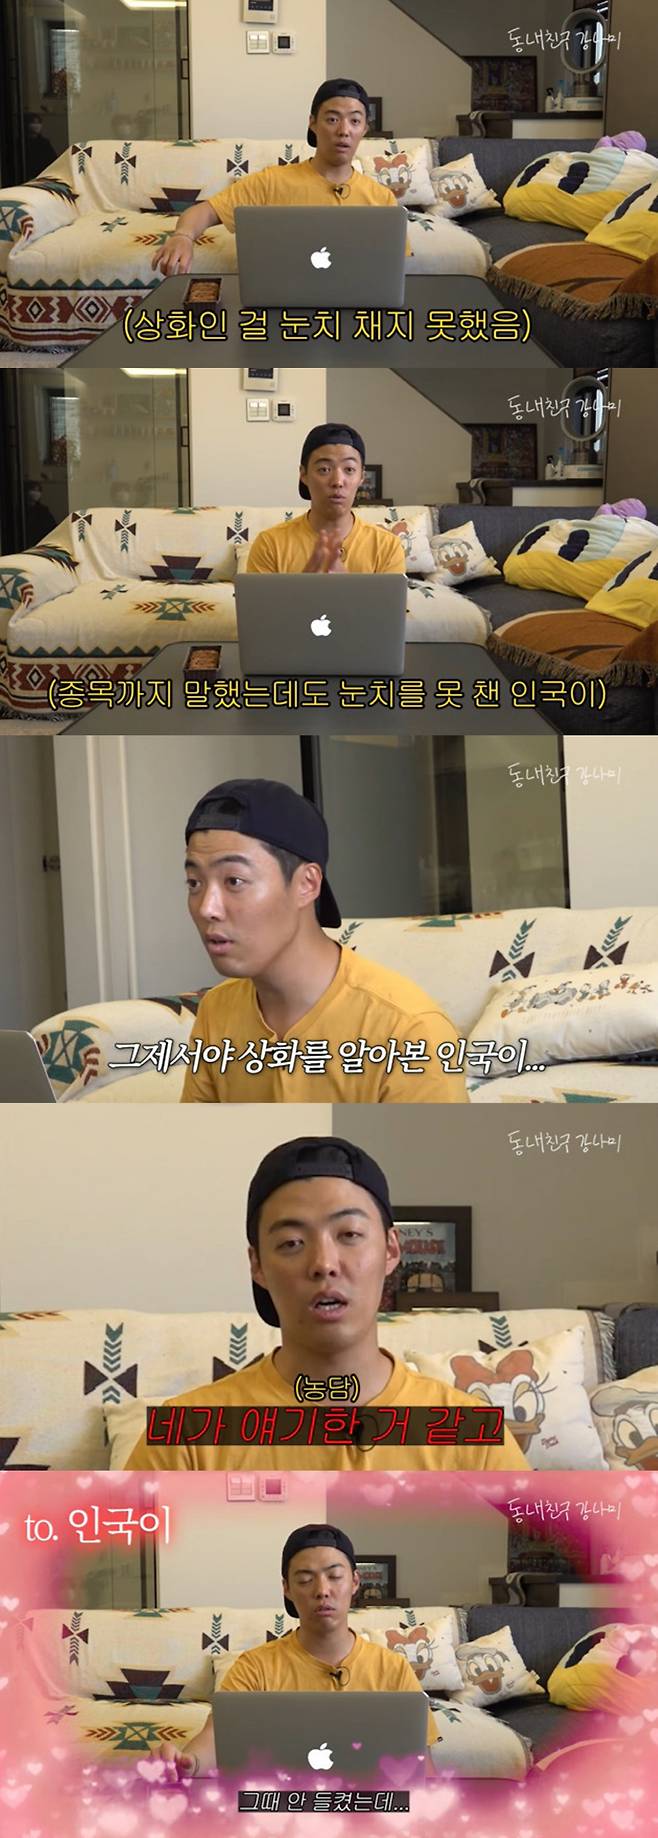 Singer Gangnam District unravels thrilling Lost Couples sledding with Lee Sang-hwaOn YouTube channel Friend Kangnami, a video titled All the sleds from the days of Sanghwa and the shackles to Lost Couples was posted on the 25th.In the video, Gangnam District has Confessions all of its secret love stories since its first La rencontre (Bonjour Monsieur Courtet) with Lee Sang-hwa.I think it was the hardest time to shoot at that time, said Gangnam District, who first met Lee Sang-hwa in SBS Jungles Law. There were too many cockroaches and bats there.I was so scared that Sanghwa took my hand. He recalled that he was close to the extreme situation.Two people who started to ride the thumb in earnest when they returned to Seoul.The two used the crew of Jungles Law to create the place of La rencontre (Bonjour Monsieur Courtet).In particular, Lee Sang-hwa urged the party to sit down, saying, Weve become so close. We met for three or four consecutive days. The crew knew our minds because we consulted.The crew was already drunk on the day we joined late, and told us, Youre Confessions, fast, you like it. So we talked seriously, too.Gangnam District said, Sanghwa is a national representative and I am a Japanese person.So I thought about marriage and I had to meet it, and I had to think about marriage and I had to meet it.I boiled ramen and kissed my eyes and kissed, but I was worried about What should I do? The two bad love stories were also revealed: I was in Japan and Sanghwa was in Canada, and they wanted to see each other and then they would come here.I did not have a direct flight, so I thought it was Settai, but I told him to come and pick me up to the real New York City.I did not get on the plane because I wrote my name wrong in New York City, but I bought it again. They had been in a secret relationship, but they had a lot of dangers to be caught, but their mother said she did not believe in the devotion of the two.Gangnam District said, I told my mother that I was dating Lee Sang-hwa on the premise of marriage.It took three days to believe, he said. I came to say hello because I could not get upset. I did not believe until I came in. Why?I opposed our marriage, not for me, but for Mr. Sanghwa. Is it funny that my mother opposed it?Friend, the first of the Lost Couples to reveal his relationship, was Seo In-guk.The Gangnam District, where Lost Couples had a hard time, went to a drink with Lee Sang-hwa to reveal his friendship with FriendSeo In-guk.Gangnam District said, (Seo In-guk) didnt recognize the top painting; even said the event, but he didnt recognize it.I was surprised when I said, Its a sweetie. I was caught three or four days after that drink. Until then, it was a secret love affair.Finally, Gangnam District sent a video letter to Seo In-guk; Gangnam District said, I was caught drinking with you and that day.I think you talked about it, he said. If I did not call it then I would not have been caught. Lets drink soon. 